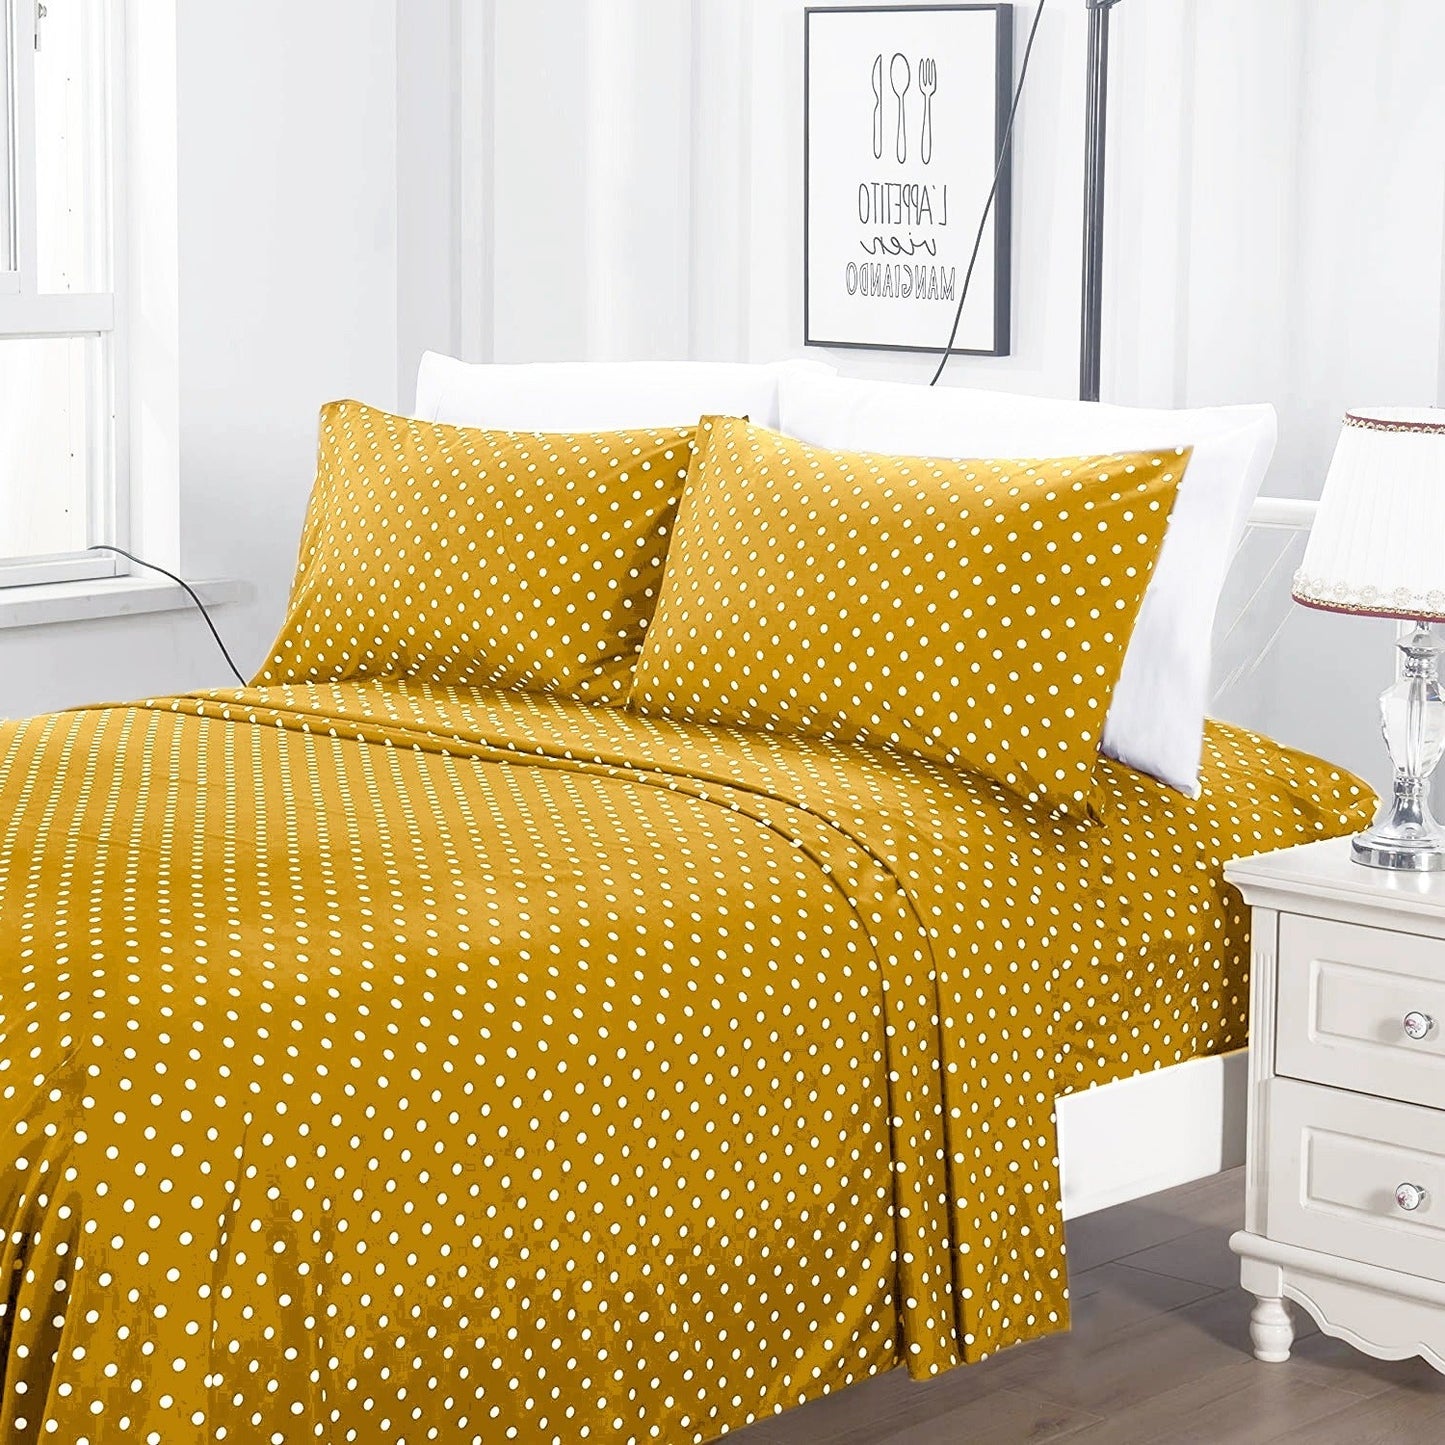 Fitted Bed Sheet-Mustard Polka Apricot